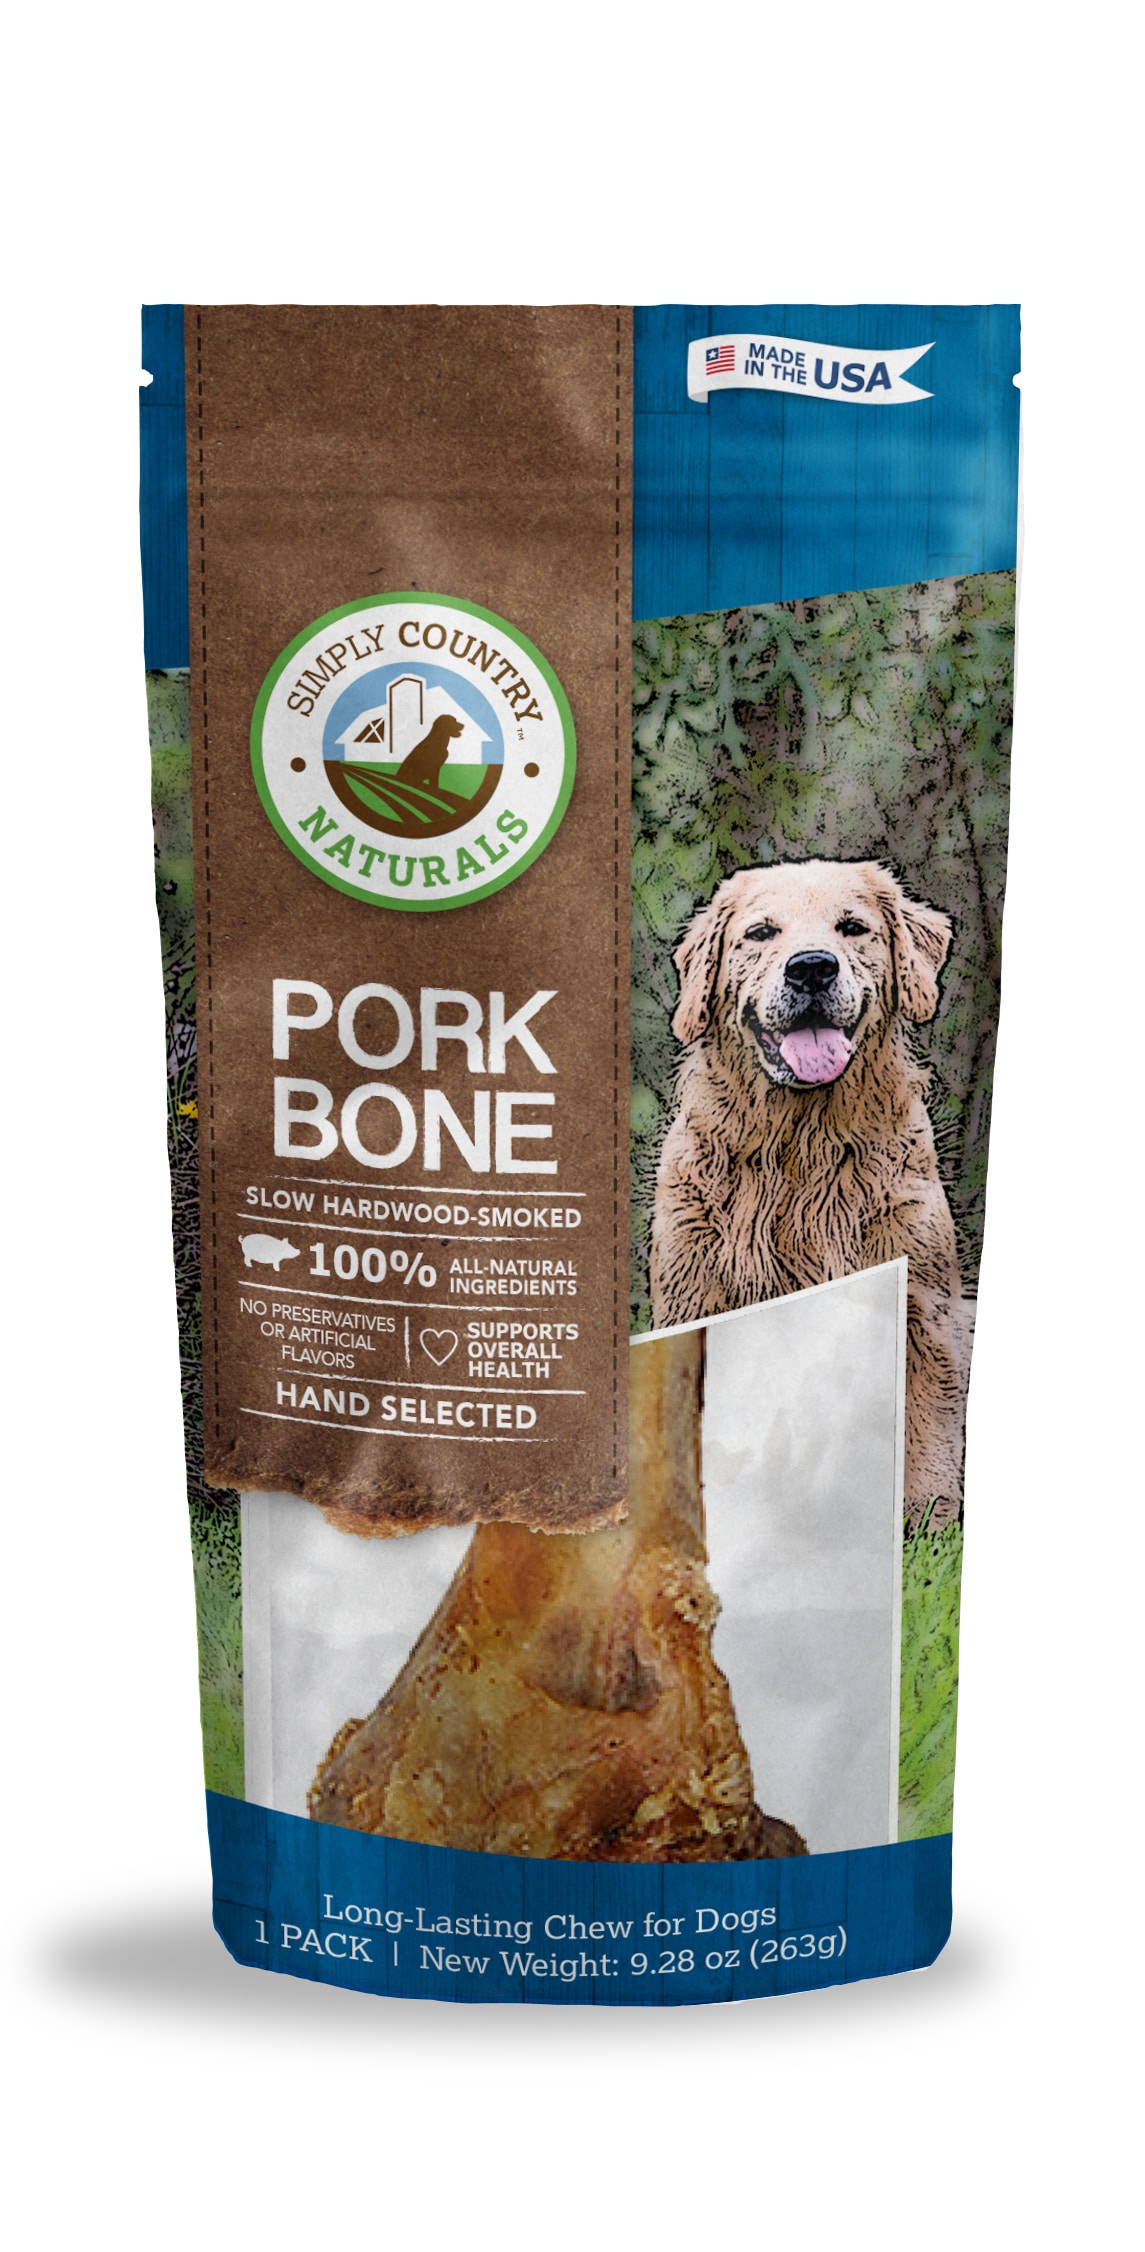 artificial bone for dogs